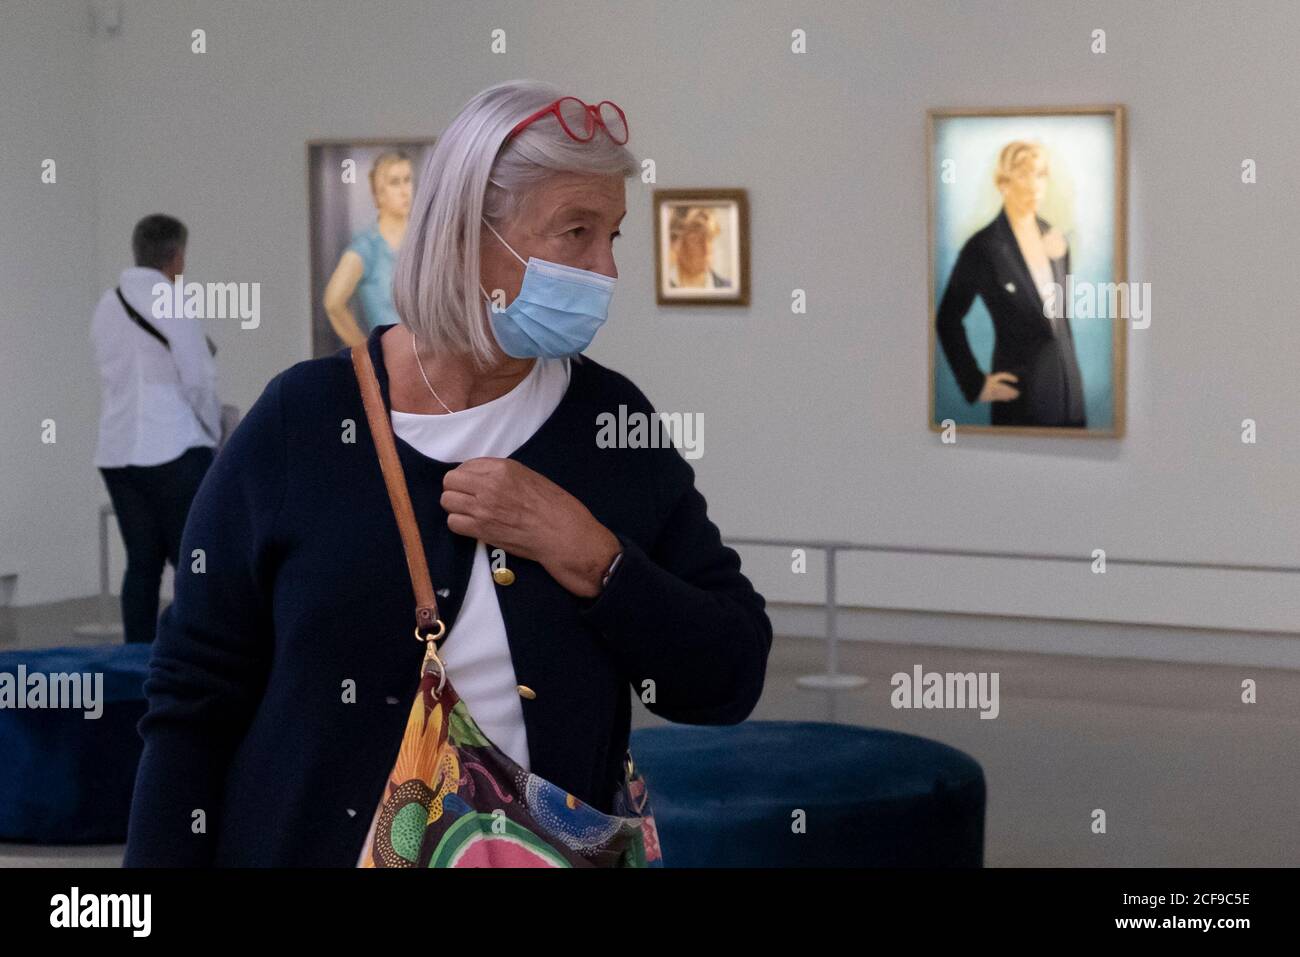 Woman with mouth guard visits a museum. Stock Photo